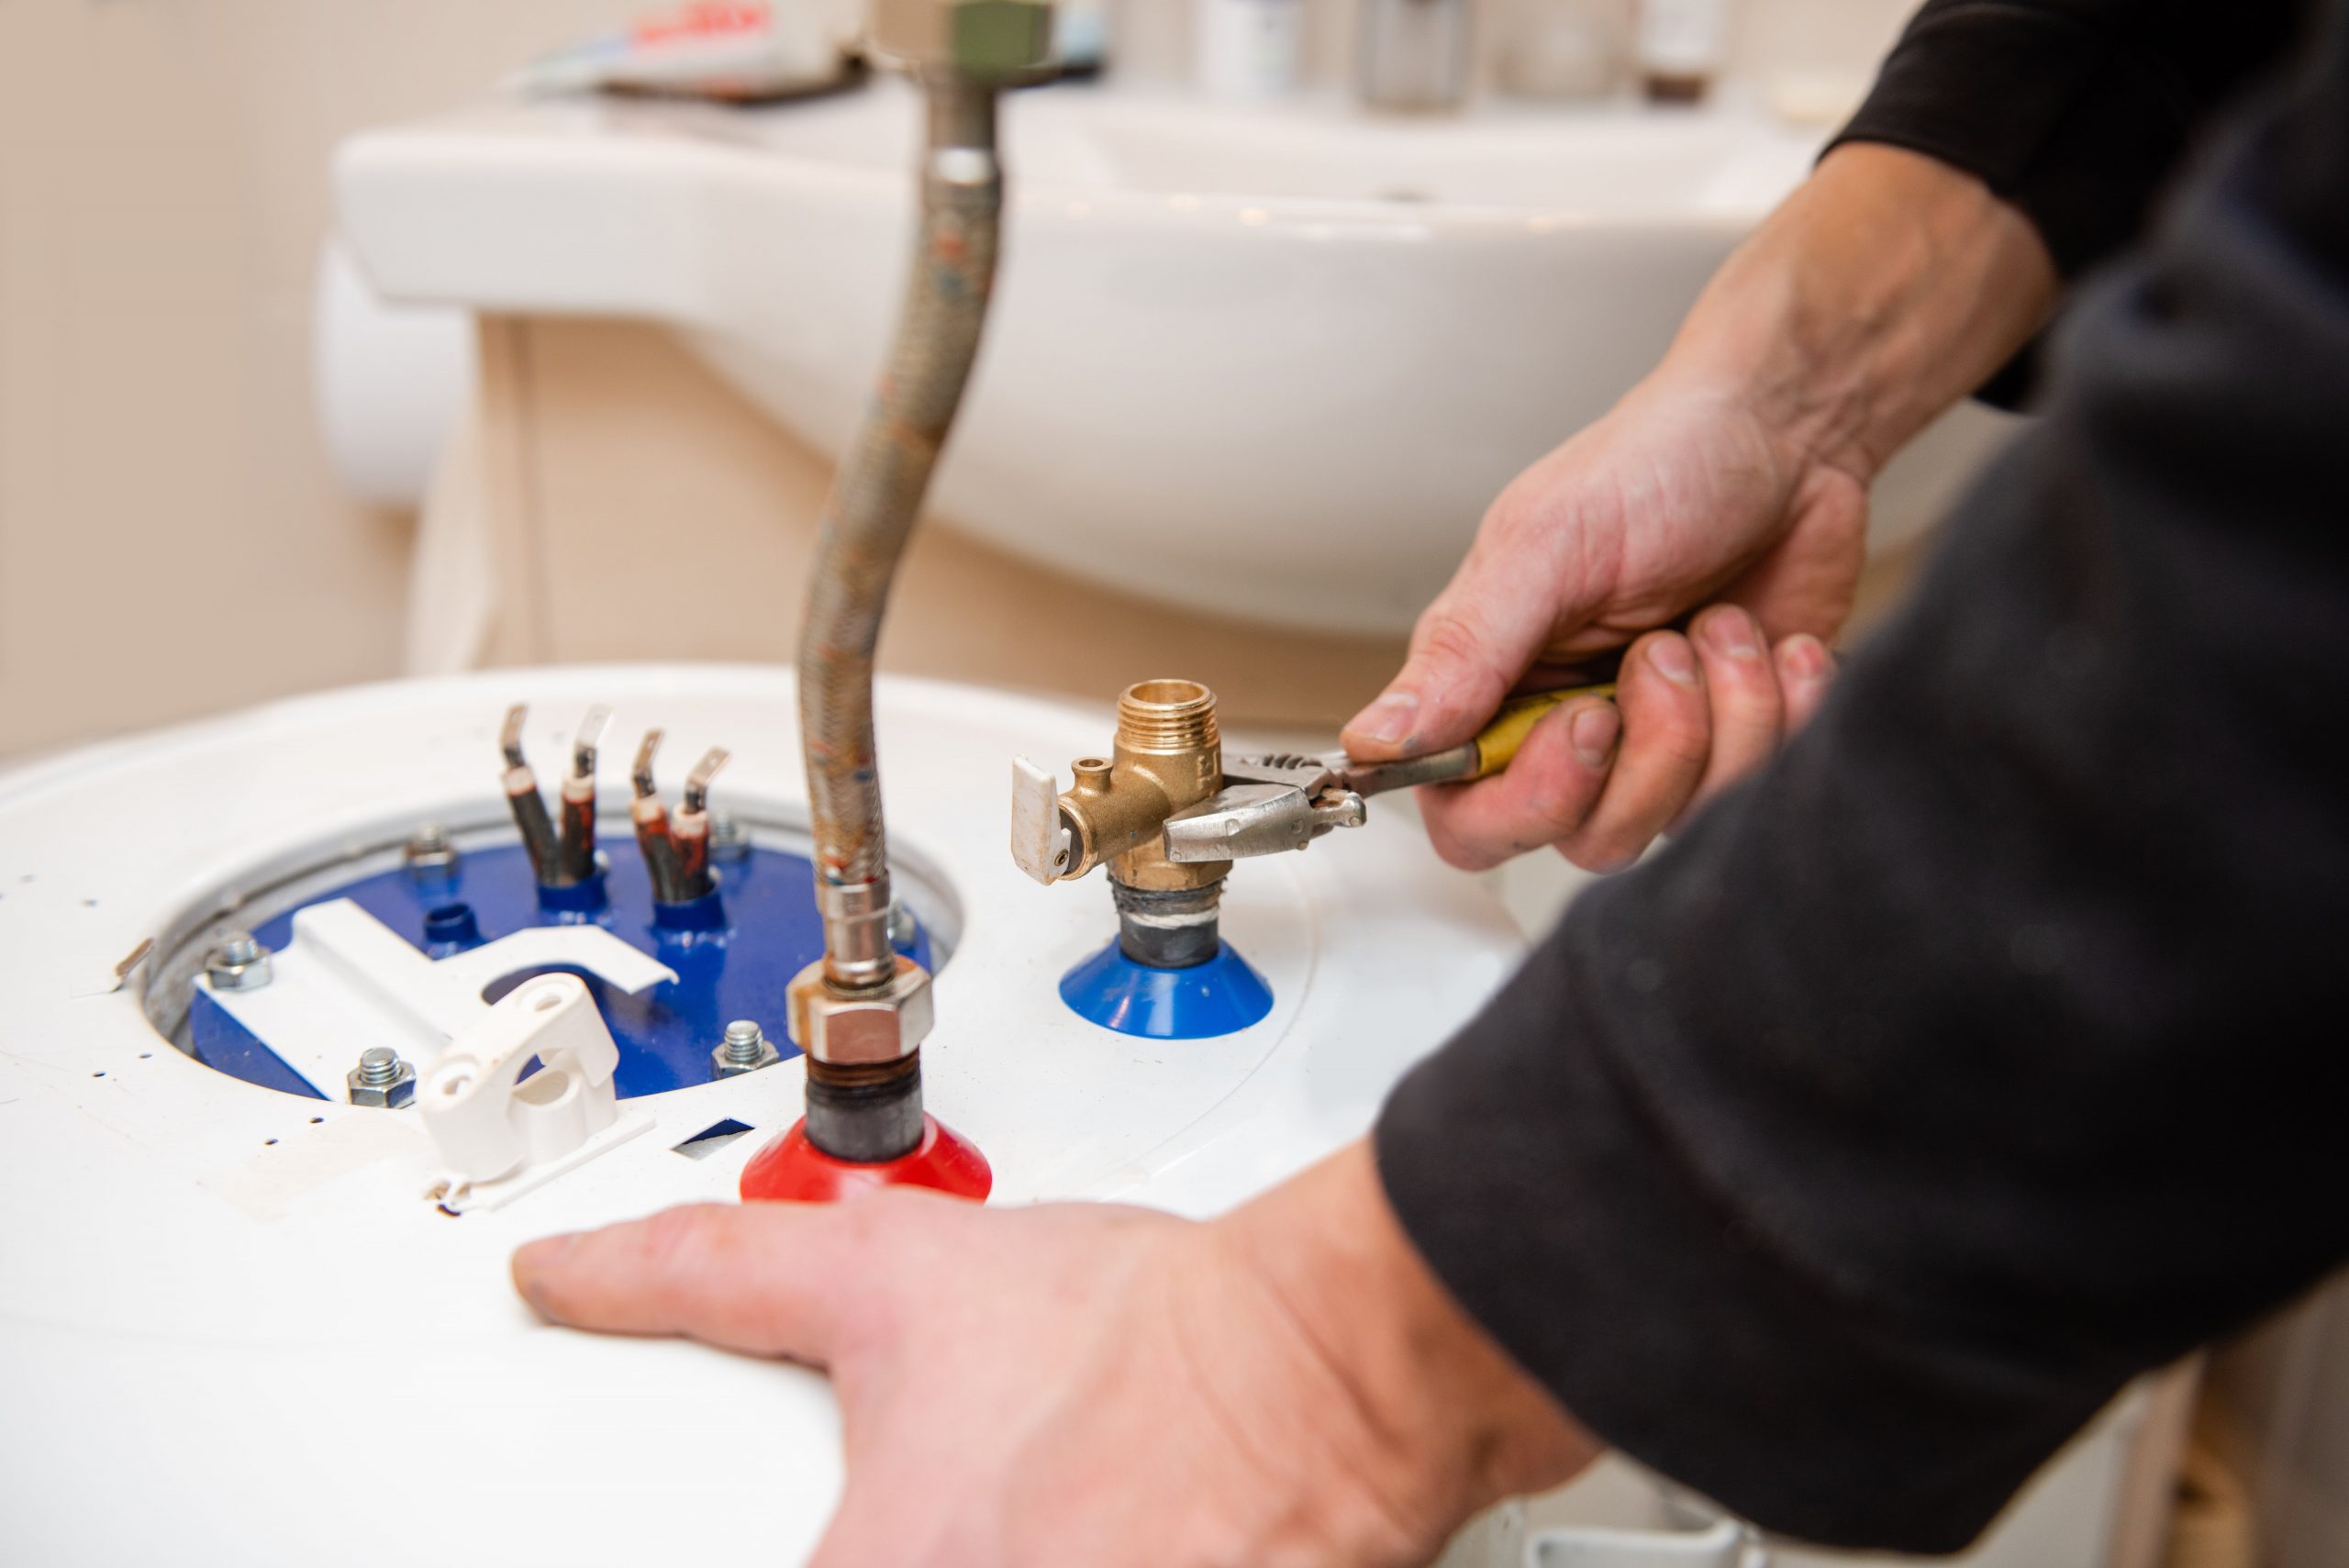 Plumber's Guide: Benefits And Drawbacks Of Indirect Water Heating